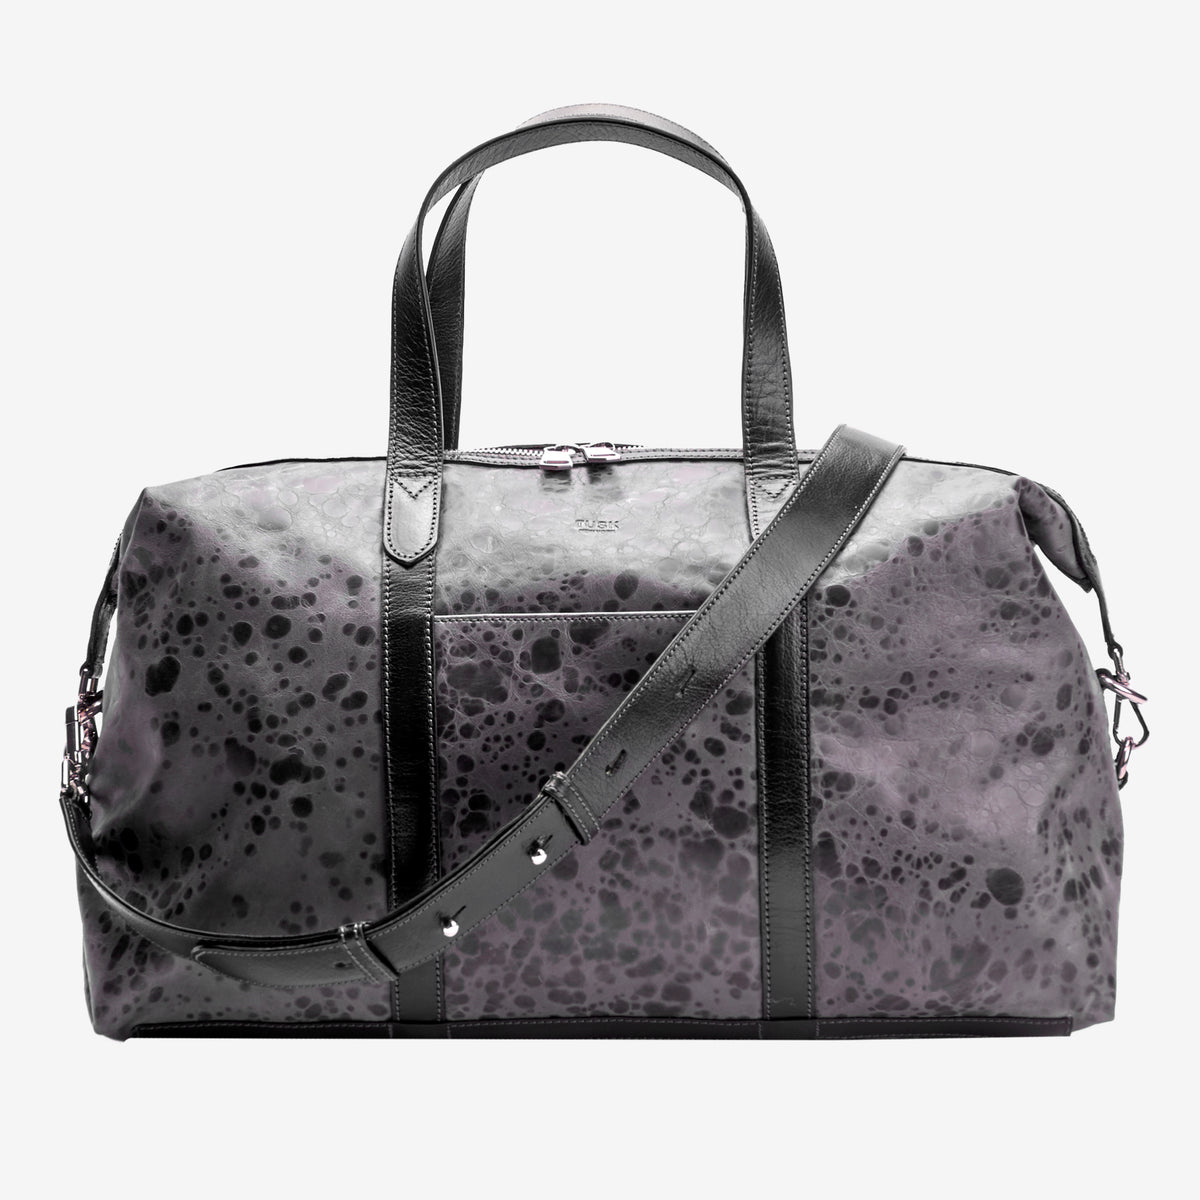    tusk-9920-spotty-leather-everyday-duffel-bag-graphite-front